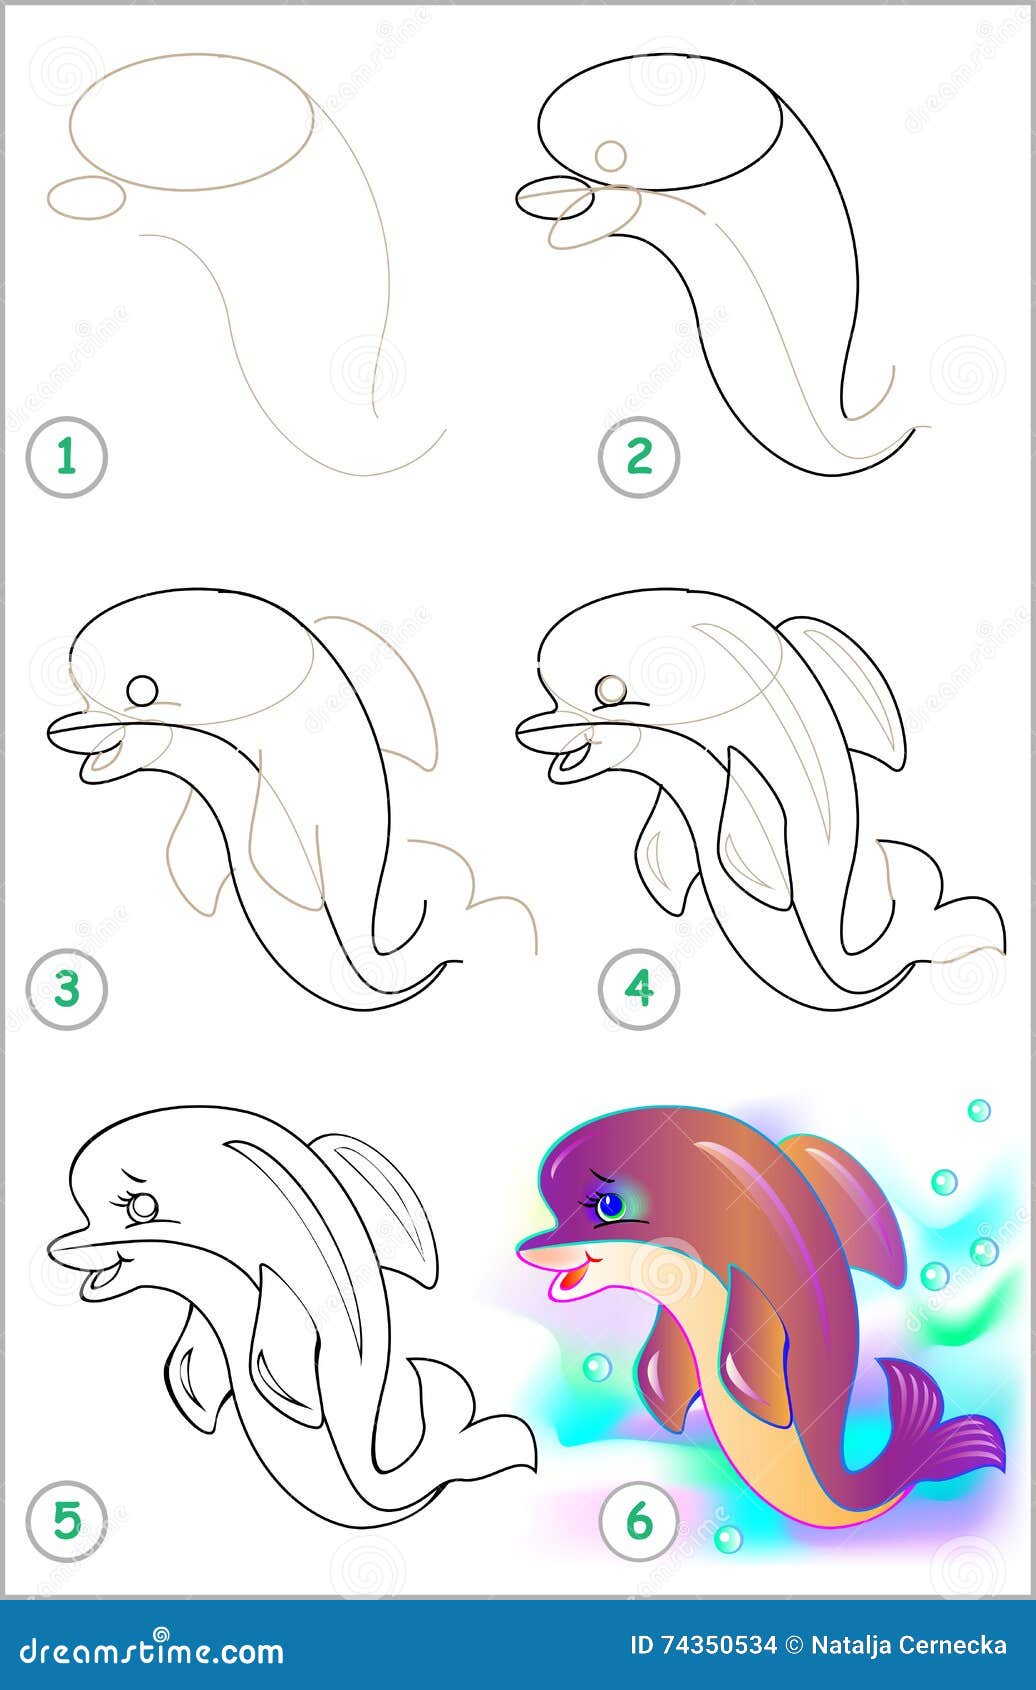 How to draw a dolphin in stages with a pencil Easy Step by Step